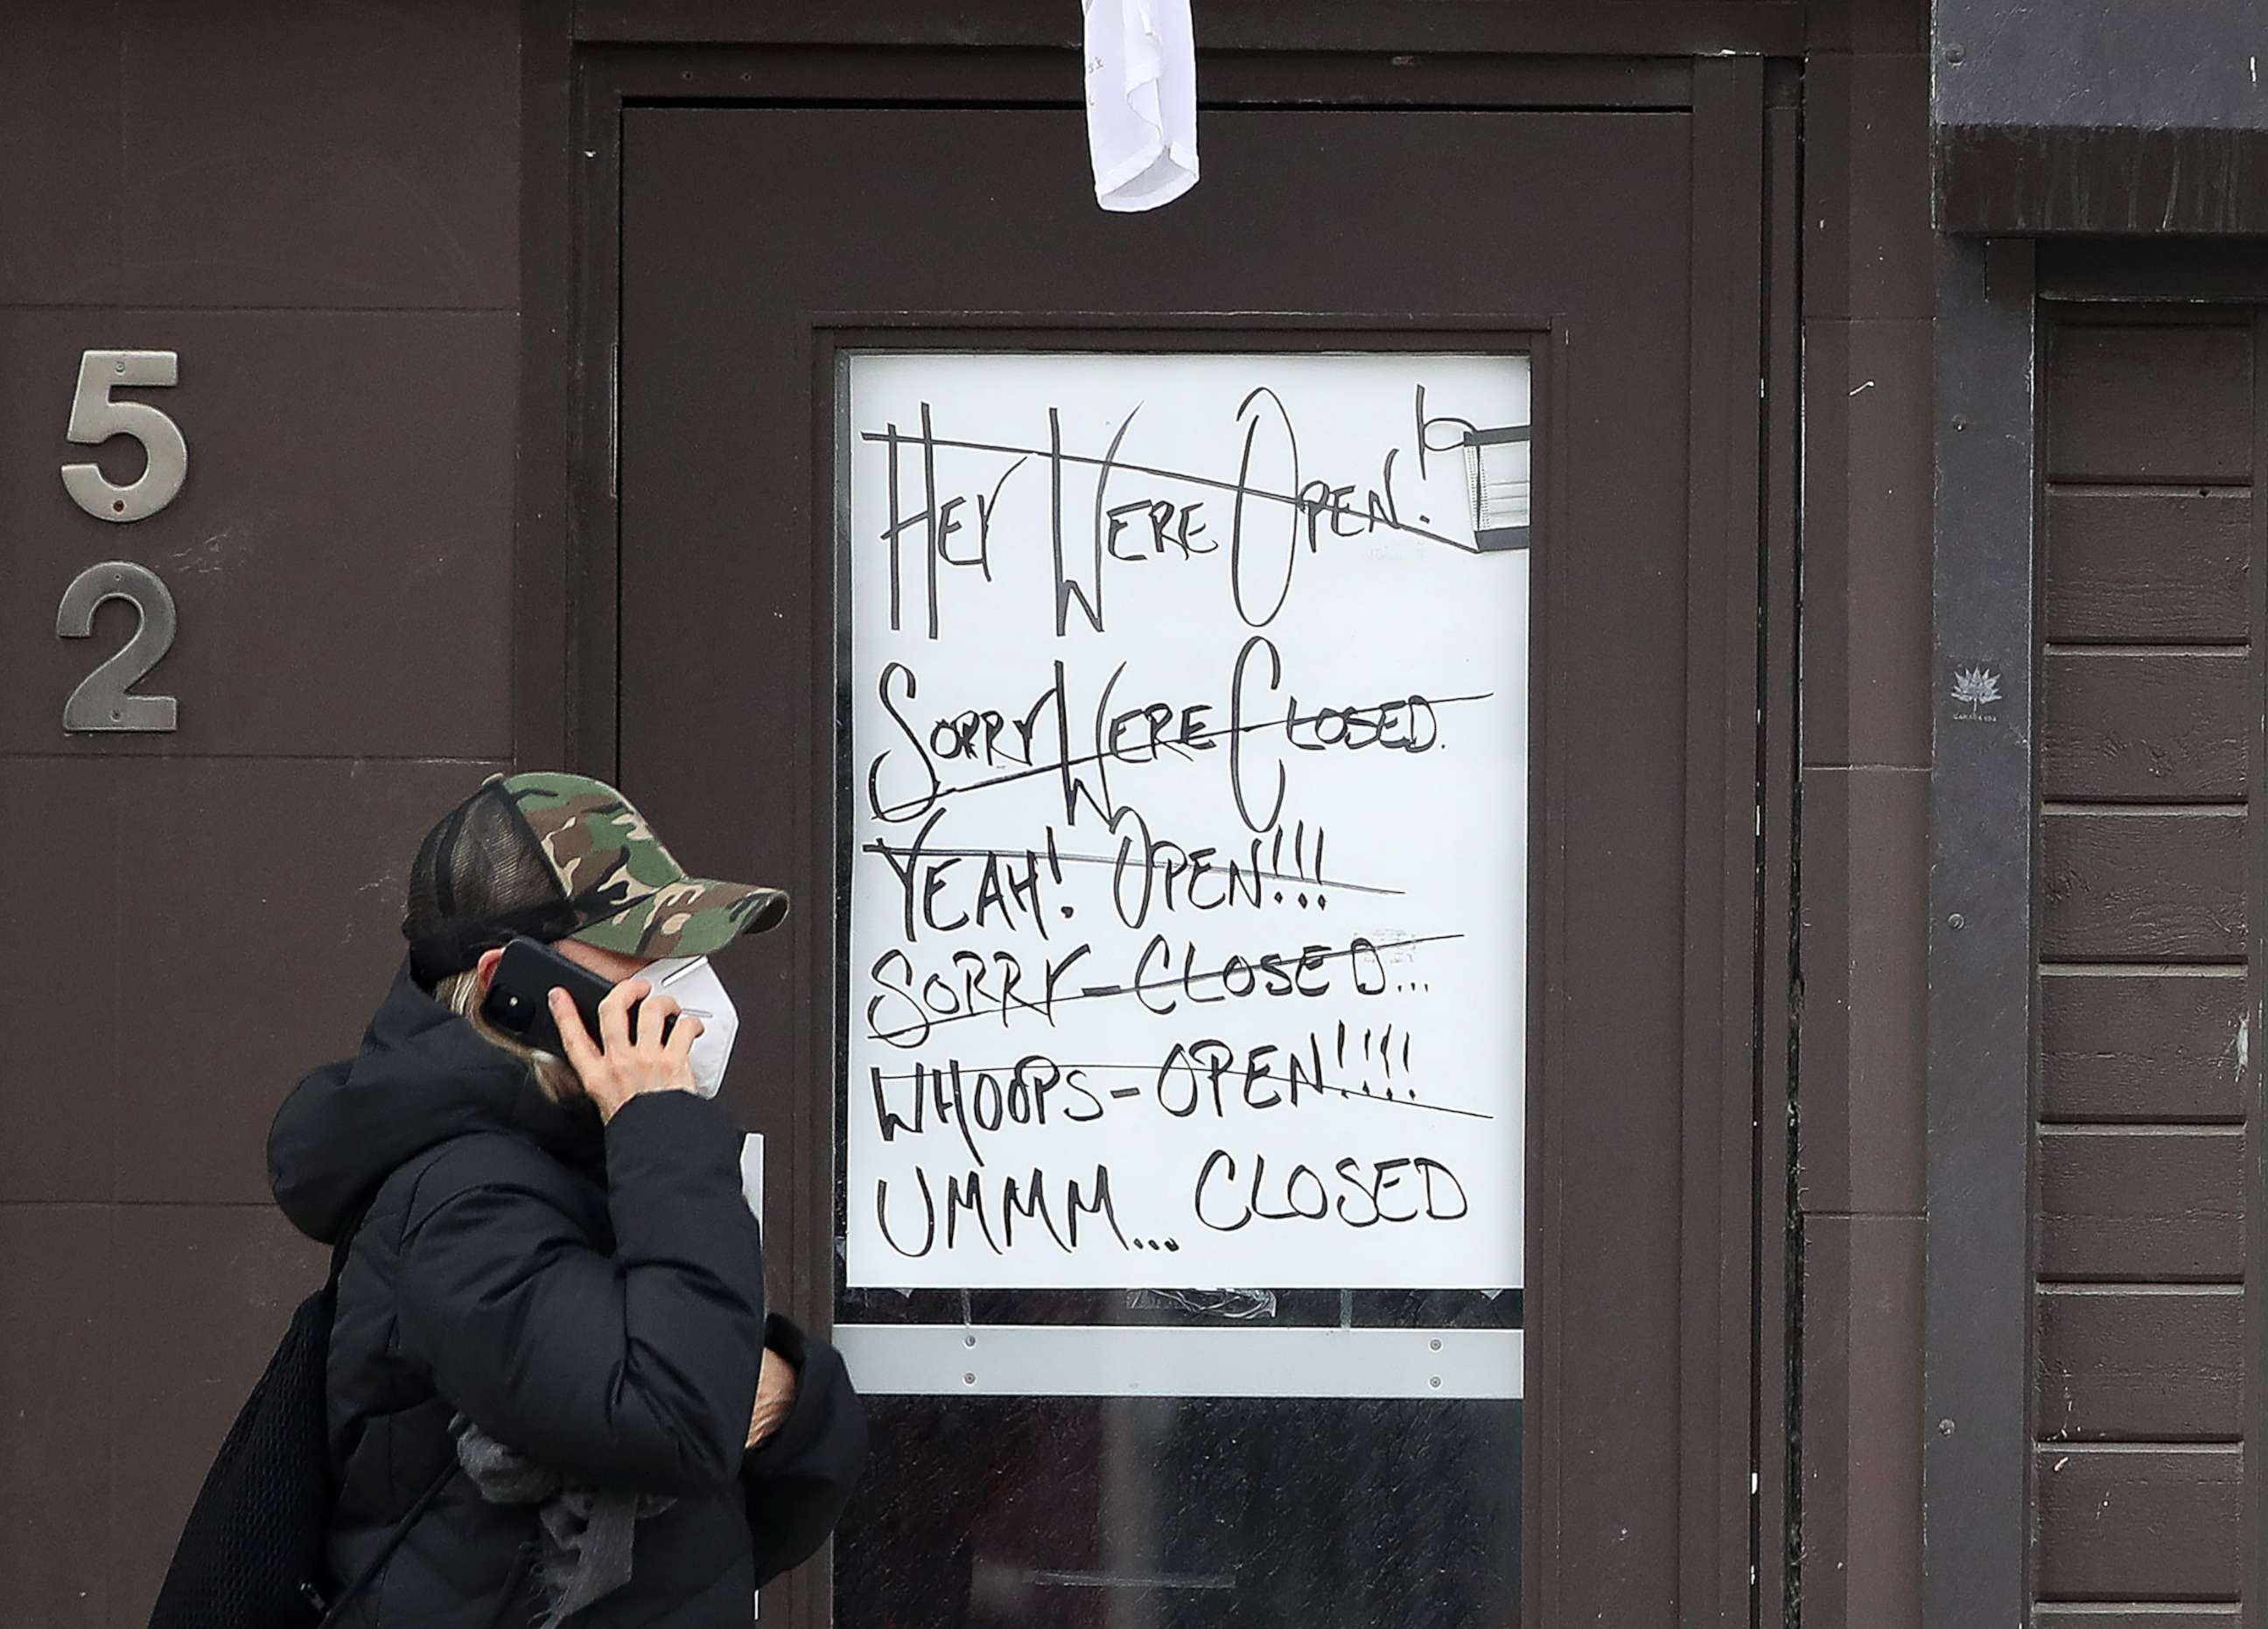 PHOTO: A sign in a window of a business expresses frustration with lockdowns, April 5, 2021, in Ontario, Canada.